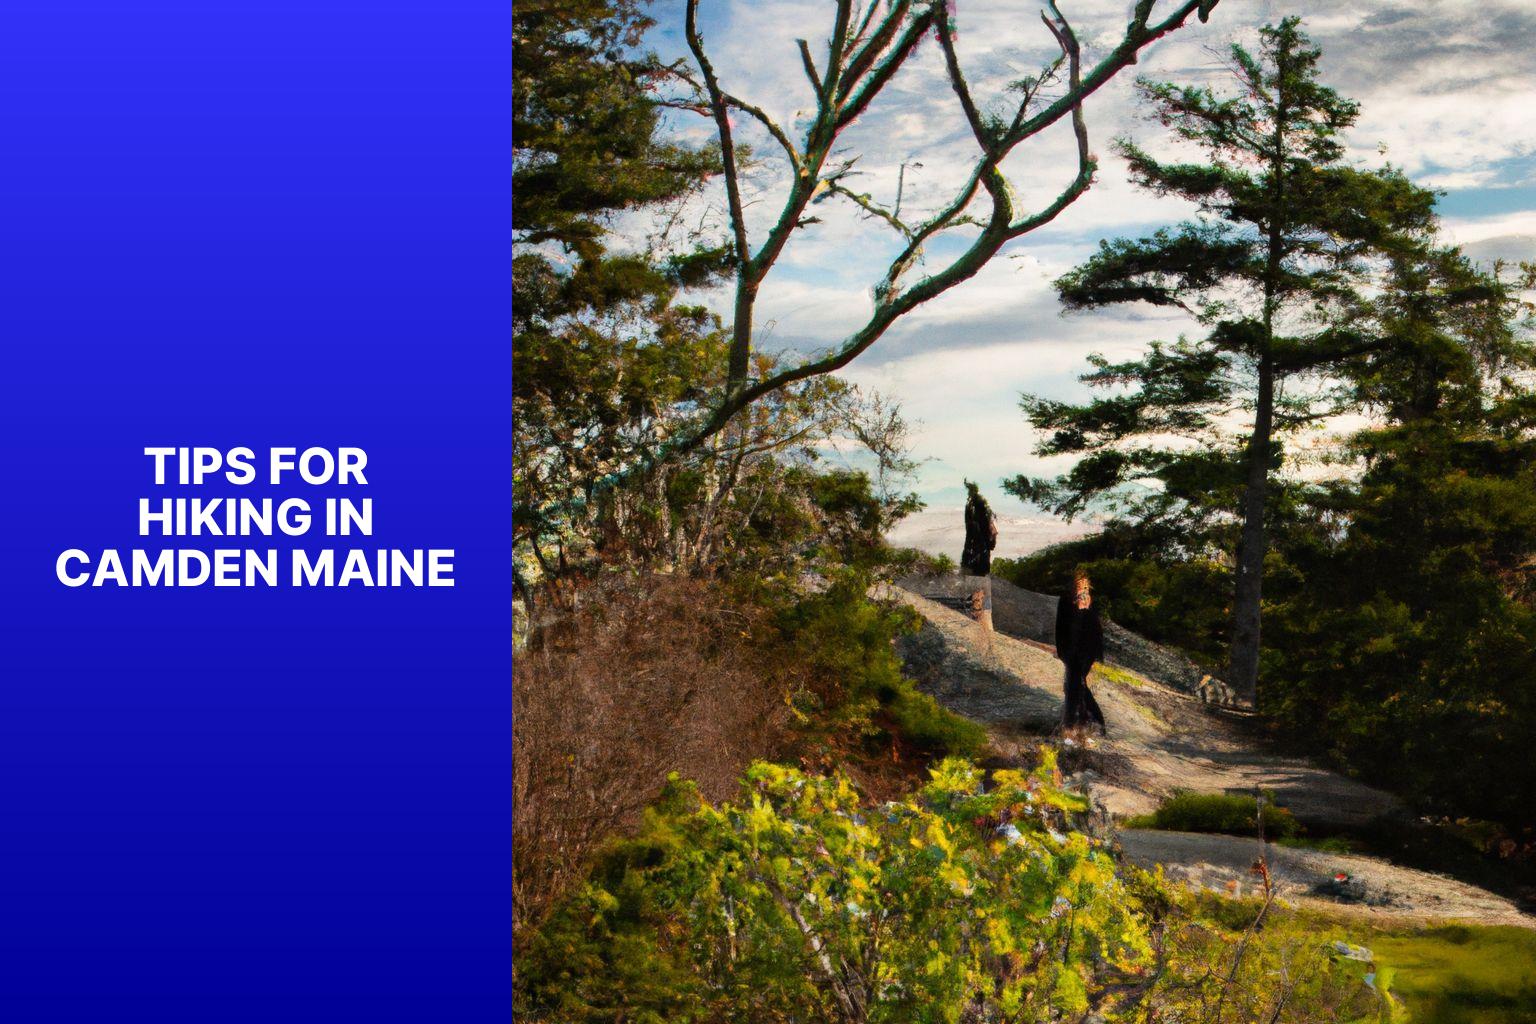 Tips for Hiking in Camden Maine - Hikes in Camden Maine 